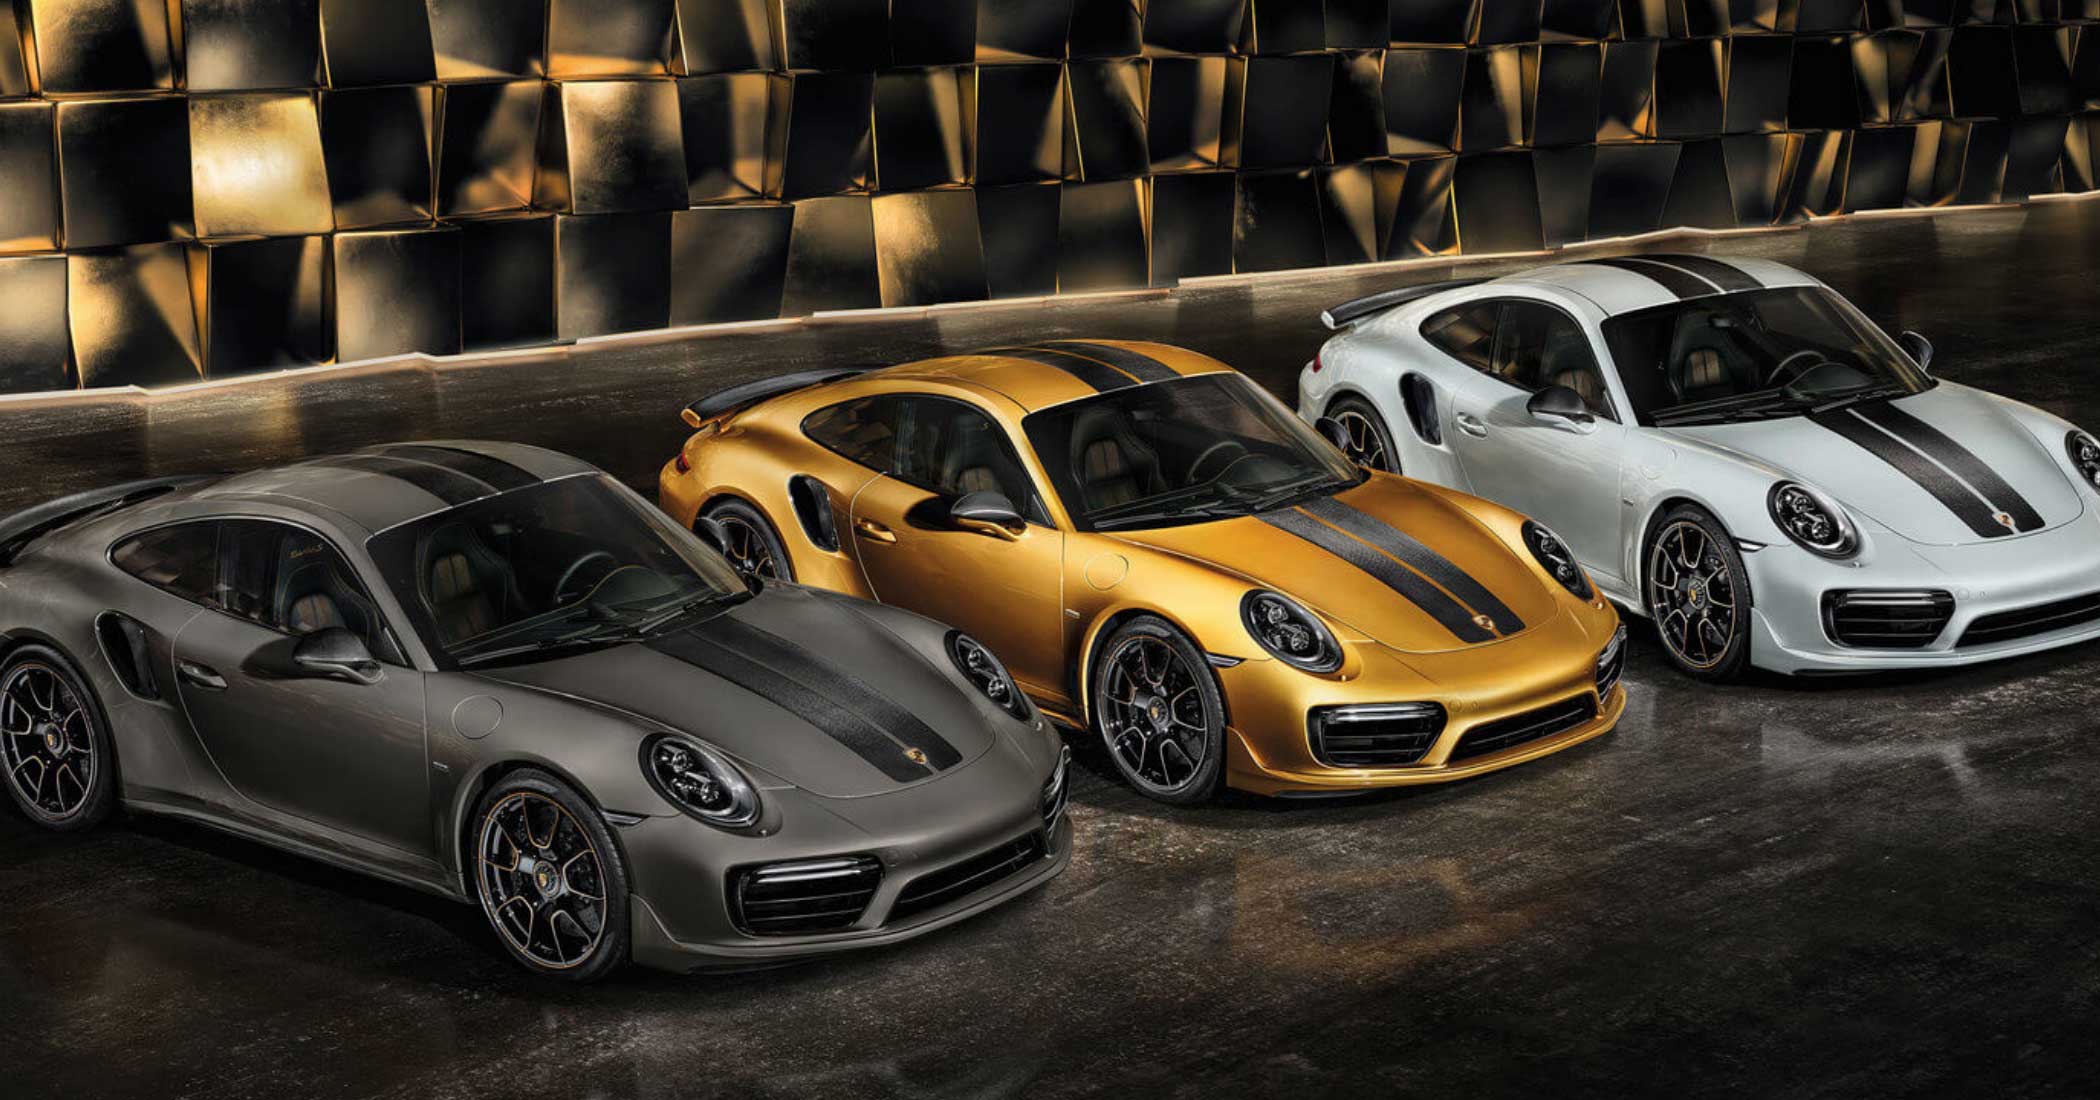 The Worlds Most Limited Exclusive Series Porsche 911 Turbo S Price